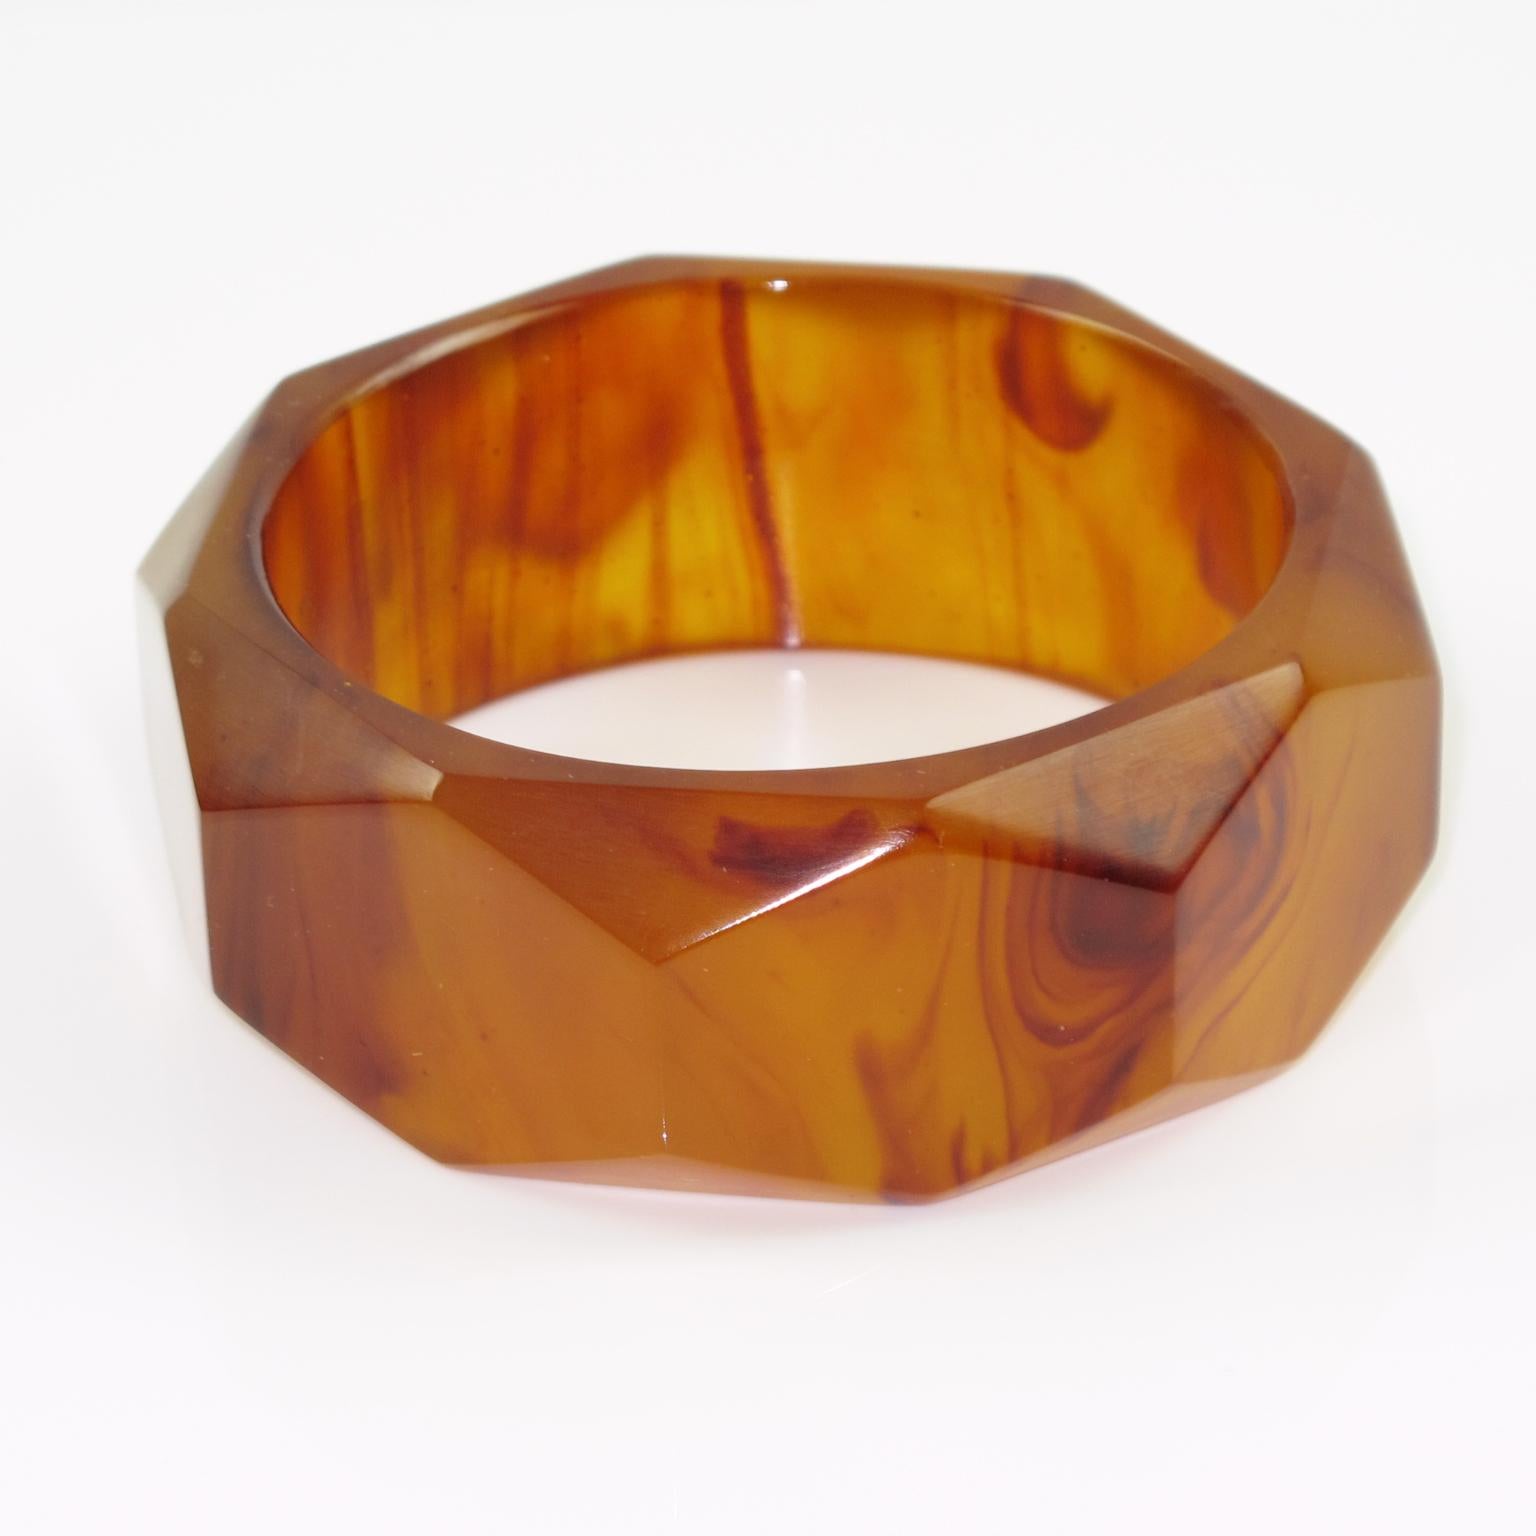 This elegant root-beer marble Bakelite carved bracelet bangle features a sliced shape with a deep faceted design and a thick wall. The piece boasts an intense root beer marble color with amber-brown cloudy swirlings and lots of translucency.